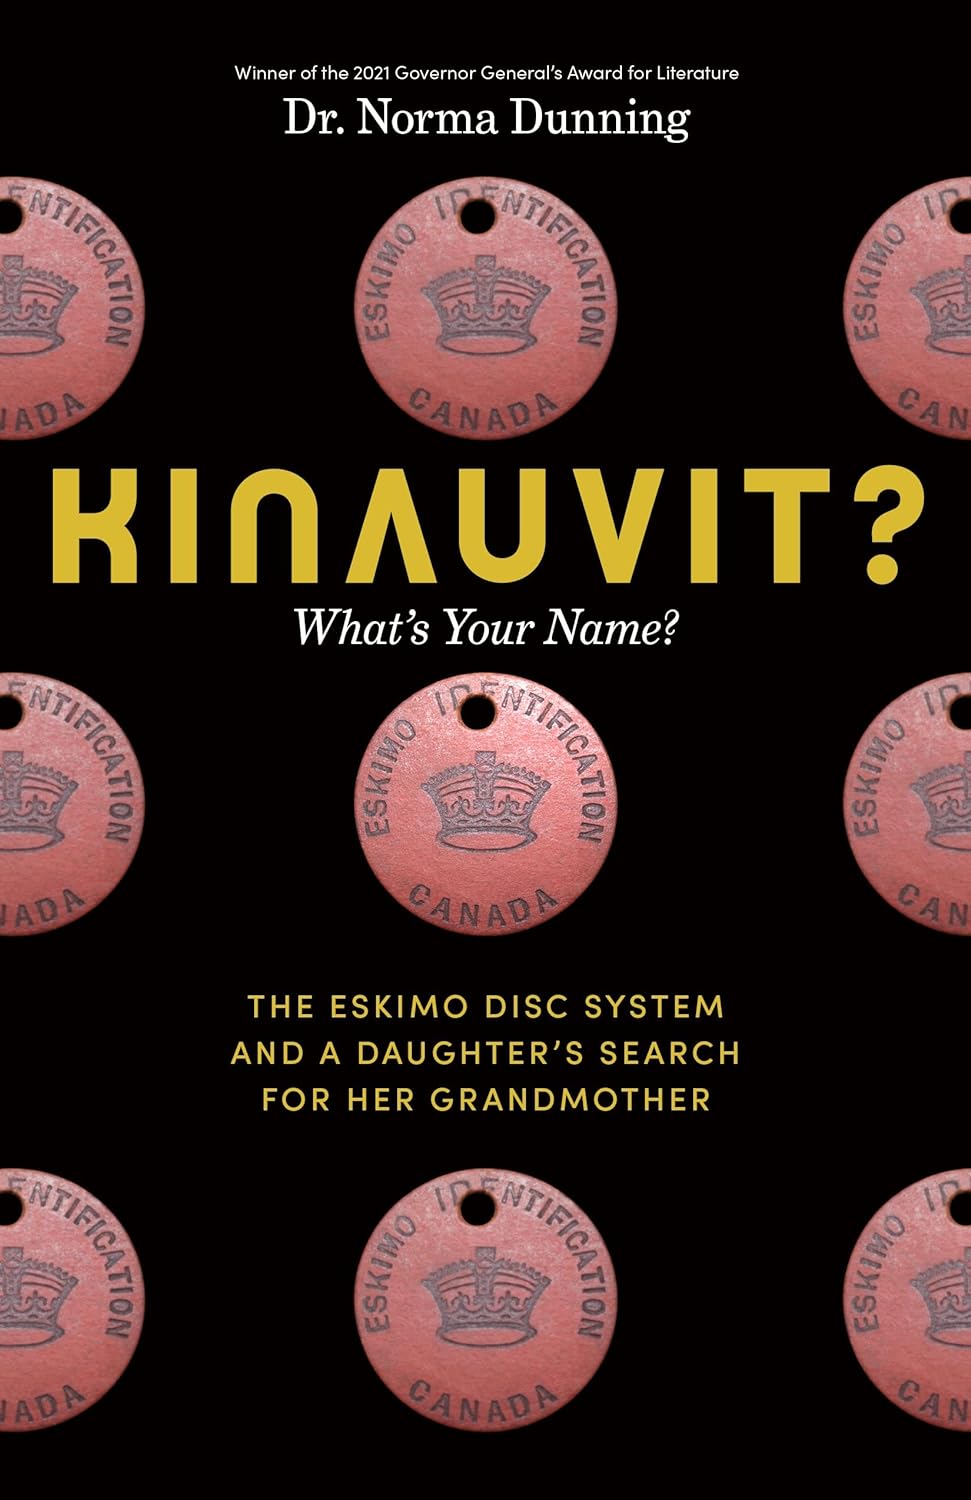 Kinauvit?: What's Your Name? The Eskimo Disc System and a Daughter's Search for her Grandmother by Dr. Norma Dunning